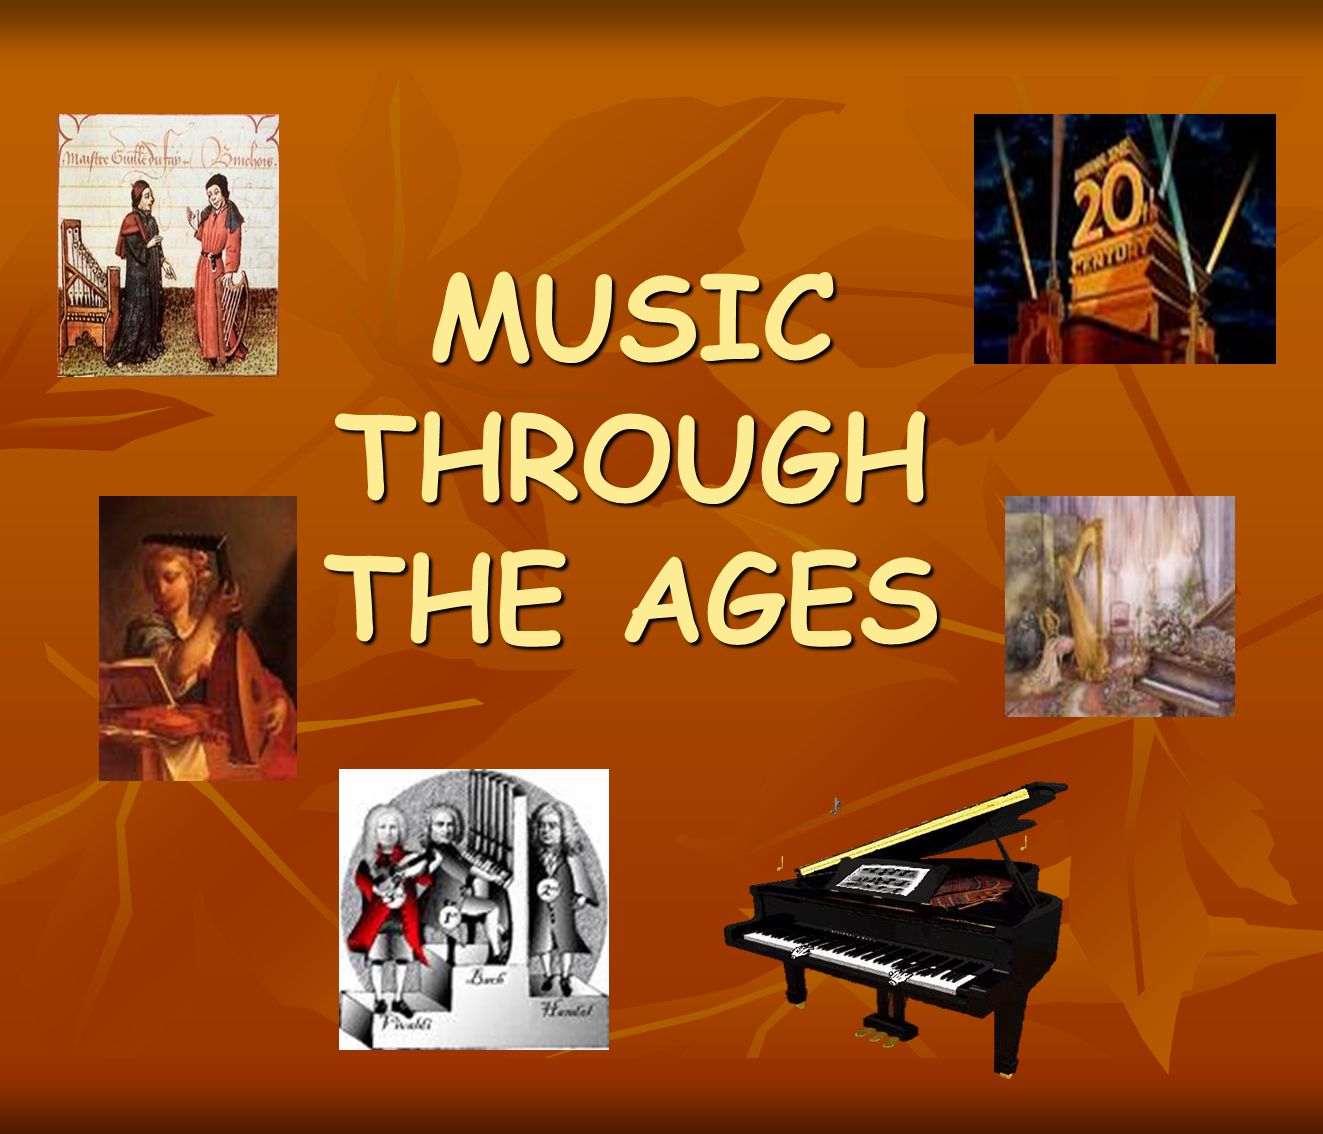 MUSIC THROUGH THE AGES